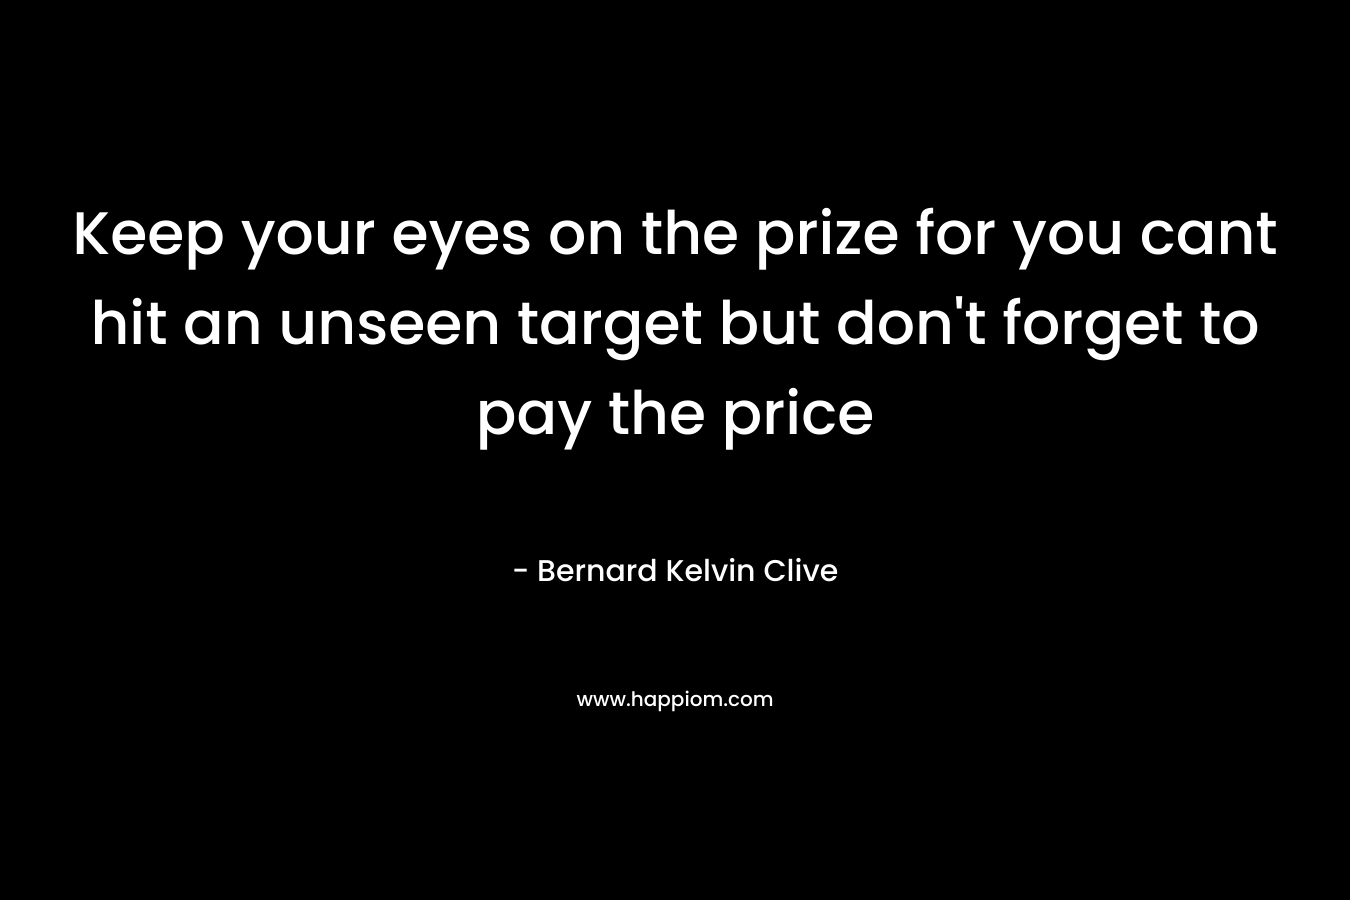 Keep your eyes on the prize for you cant hit an unseen target but don't forget to pay the price